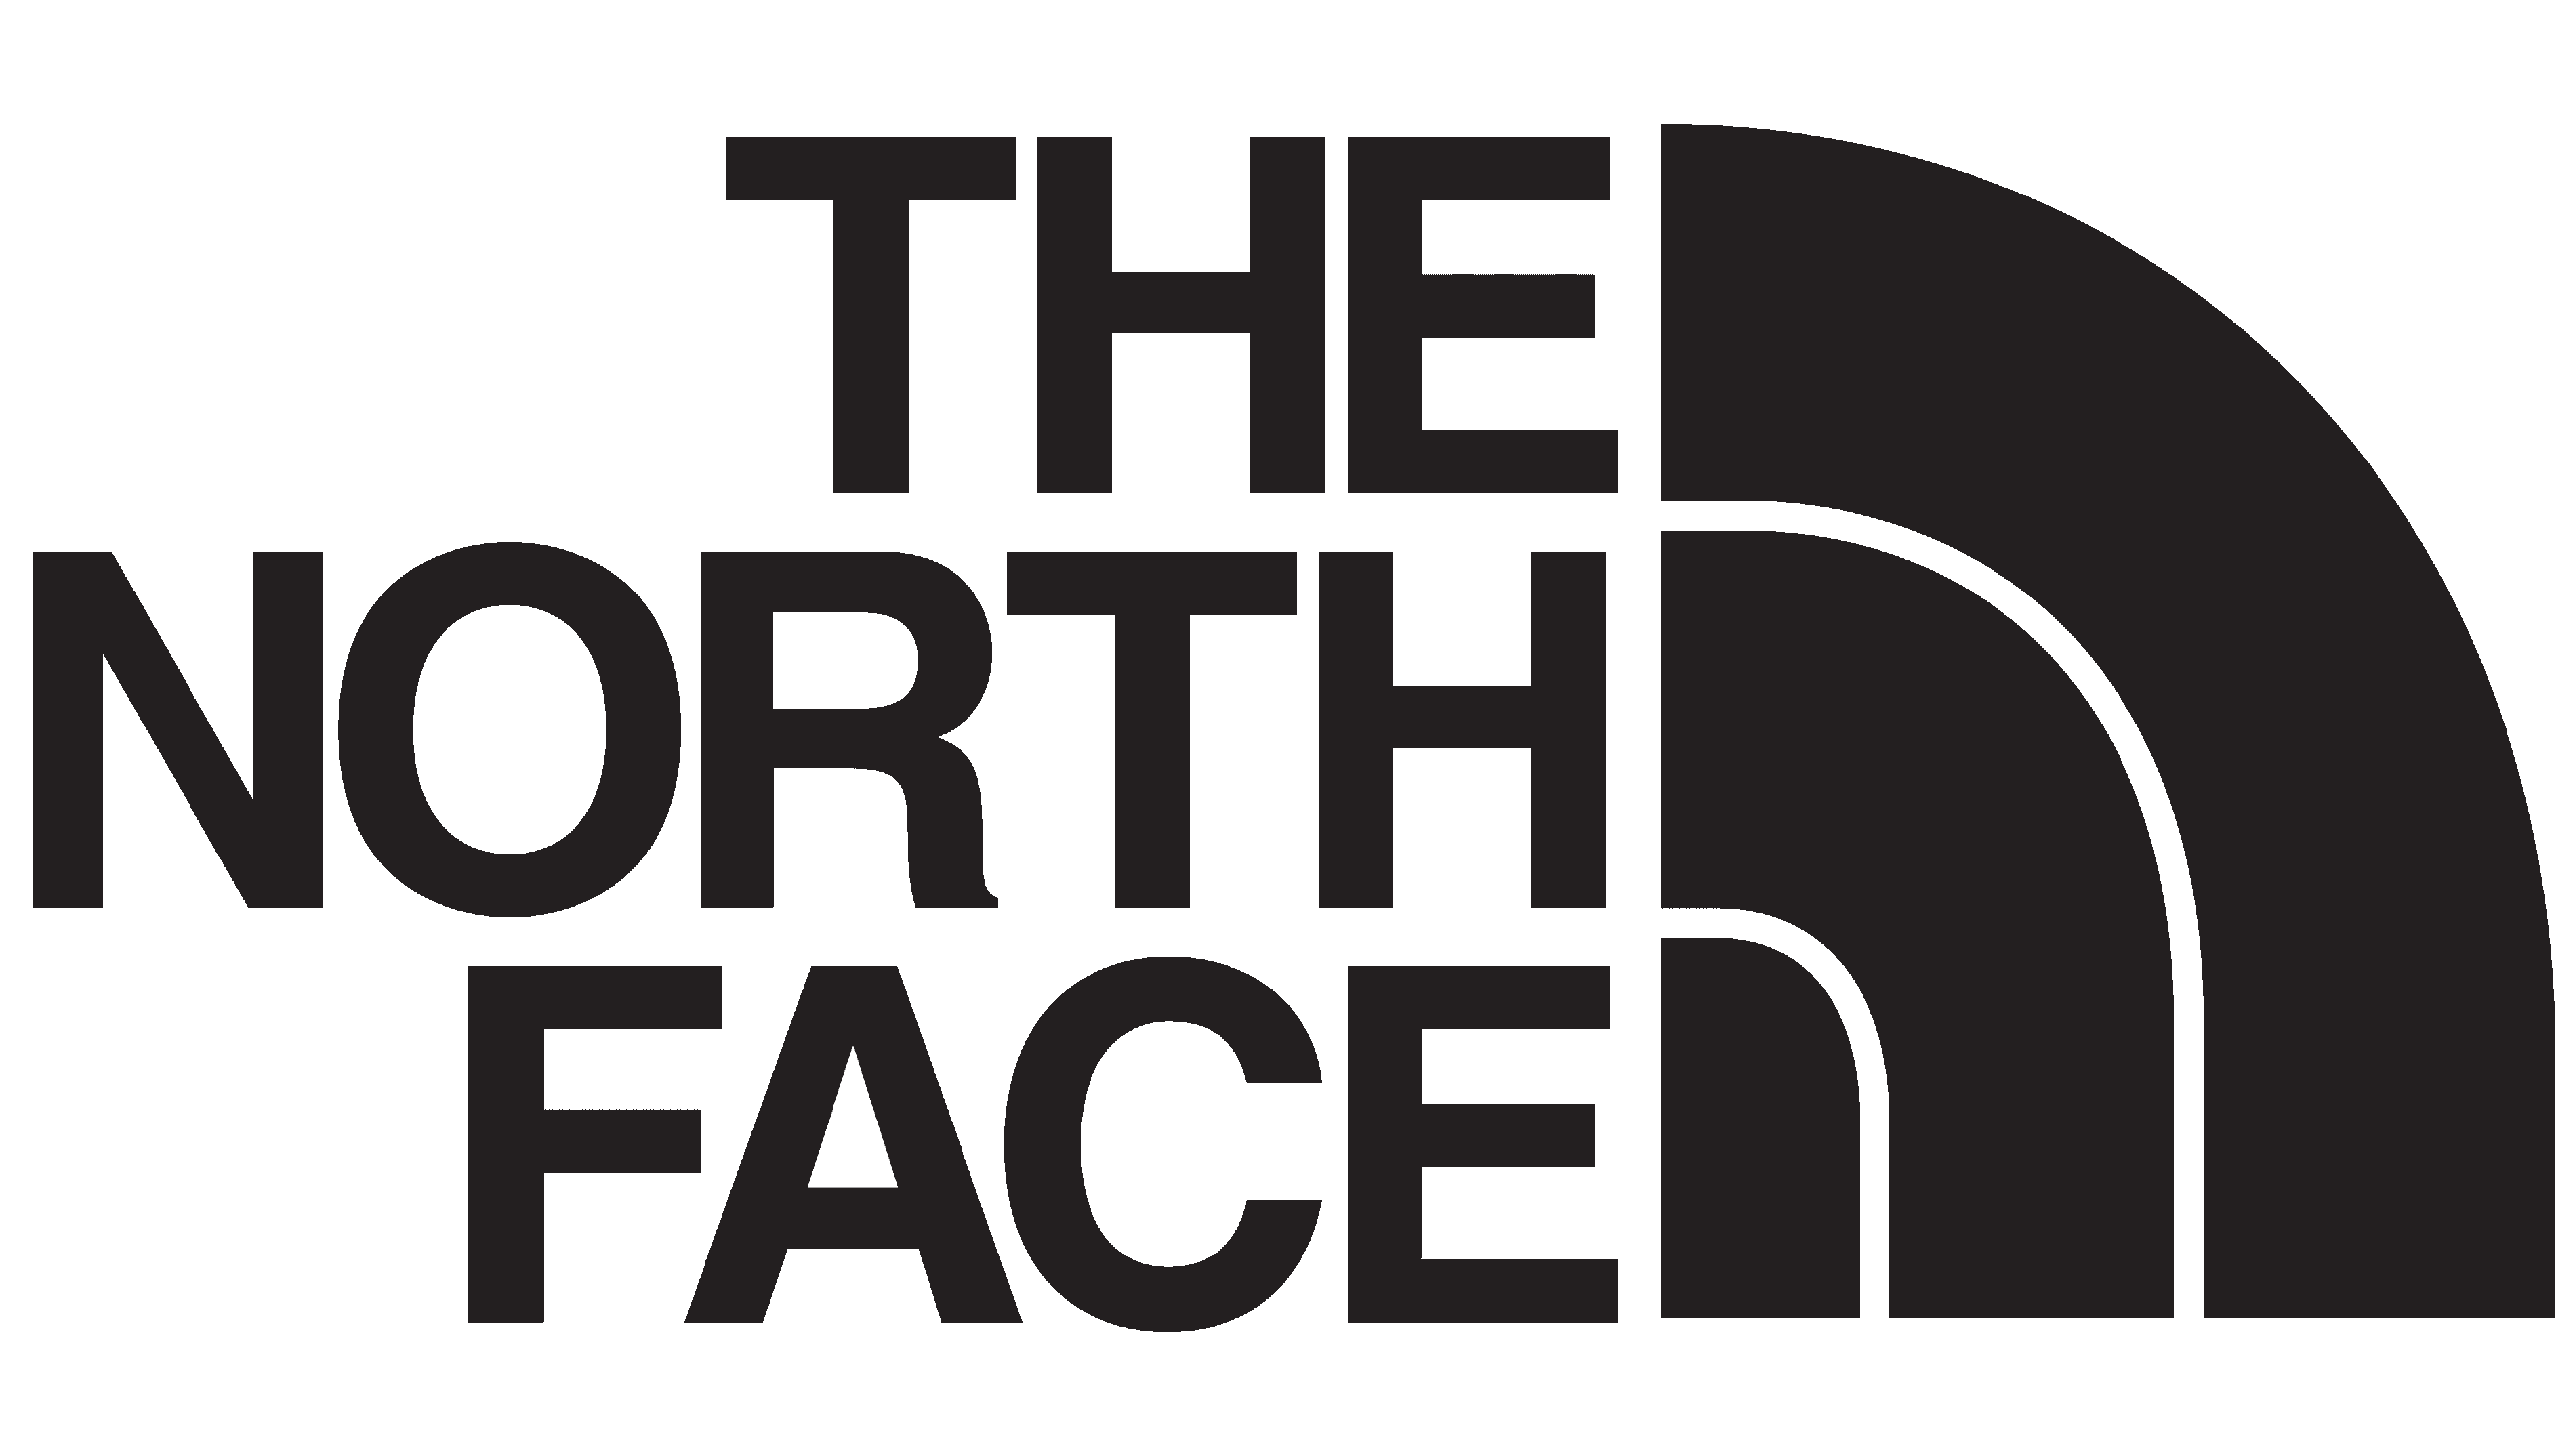 https://search.alpinstore.com/data/media/47/2023-01-01_13-52-06_the-north-face-logo-1966.png